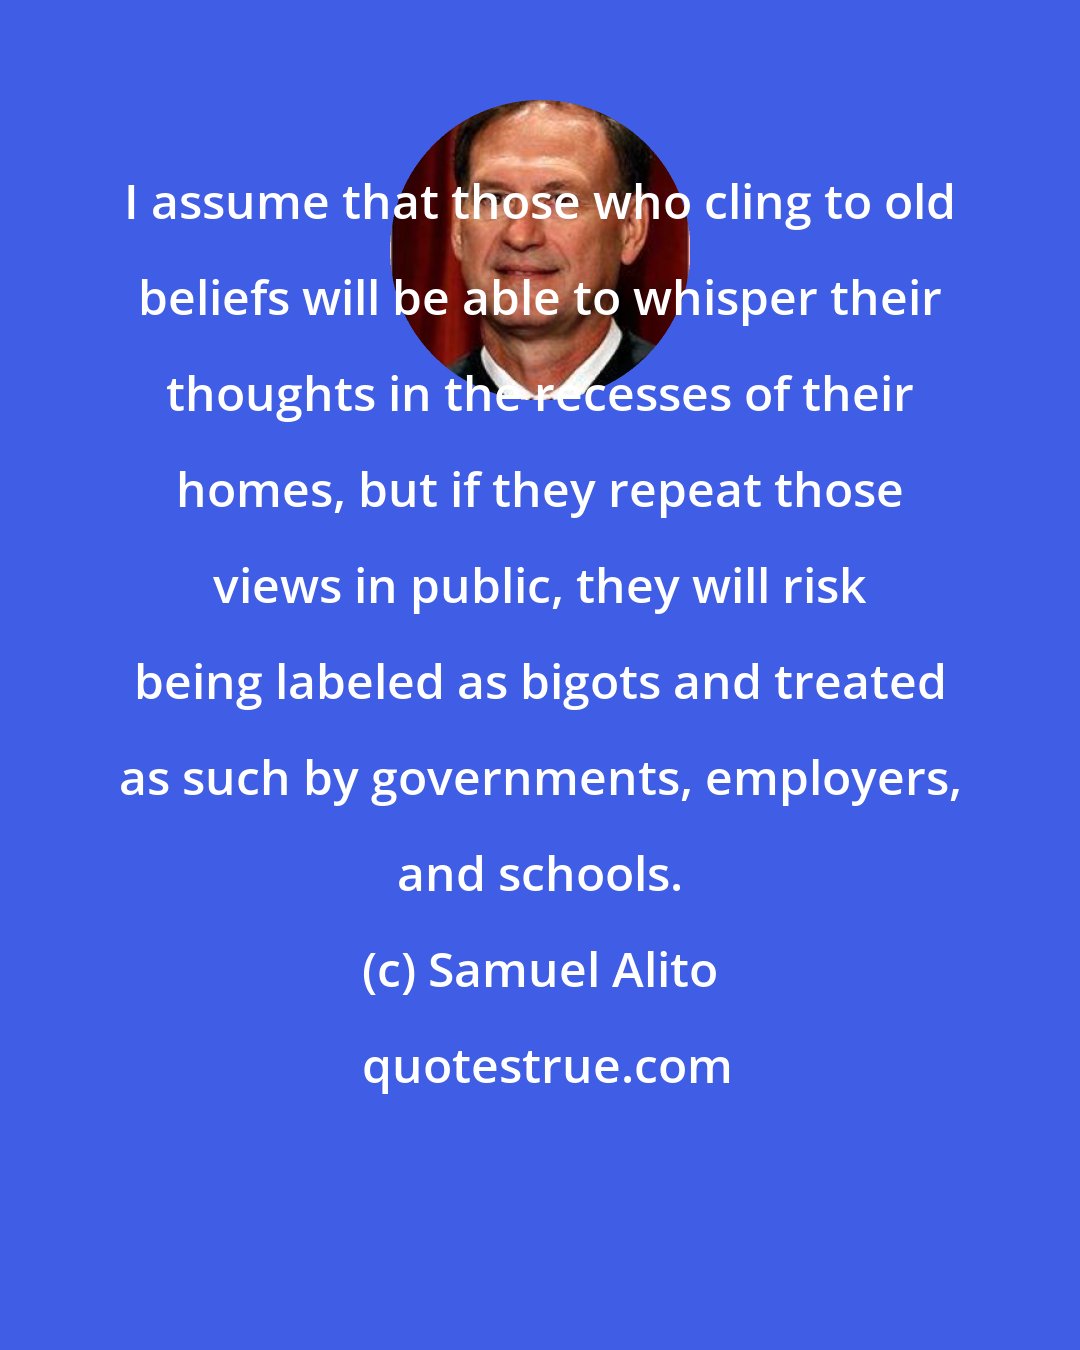 Samuel Alito: I assume that those who cling to old beliefs will be able to whisper their thoughts in the recesses of their homes, but if they repeat those views in public, they will risk being labeled as bigots and treated as such by governments, employers, and schools.